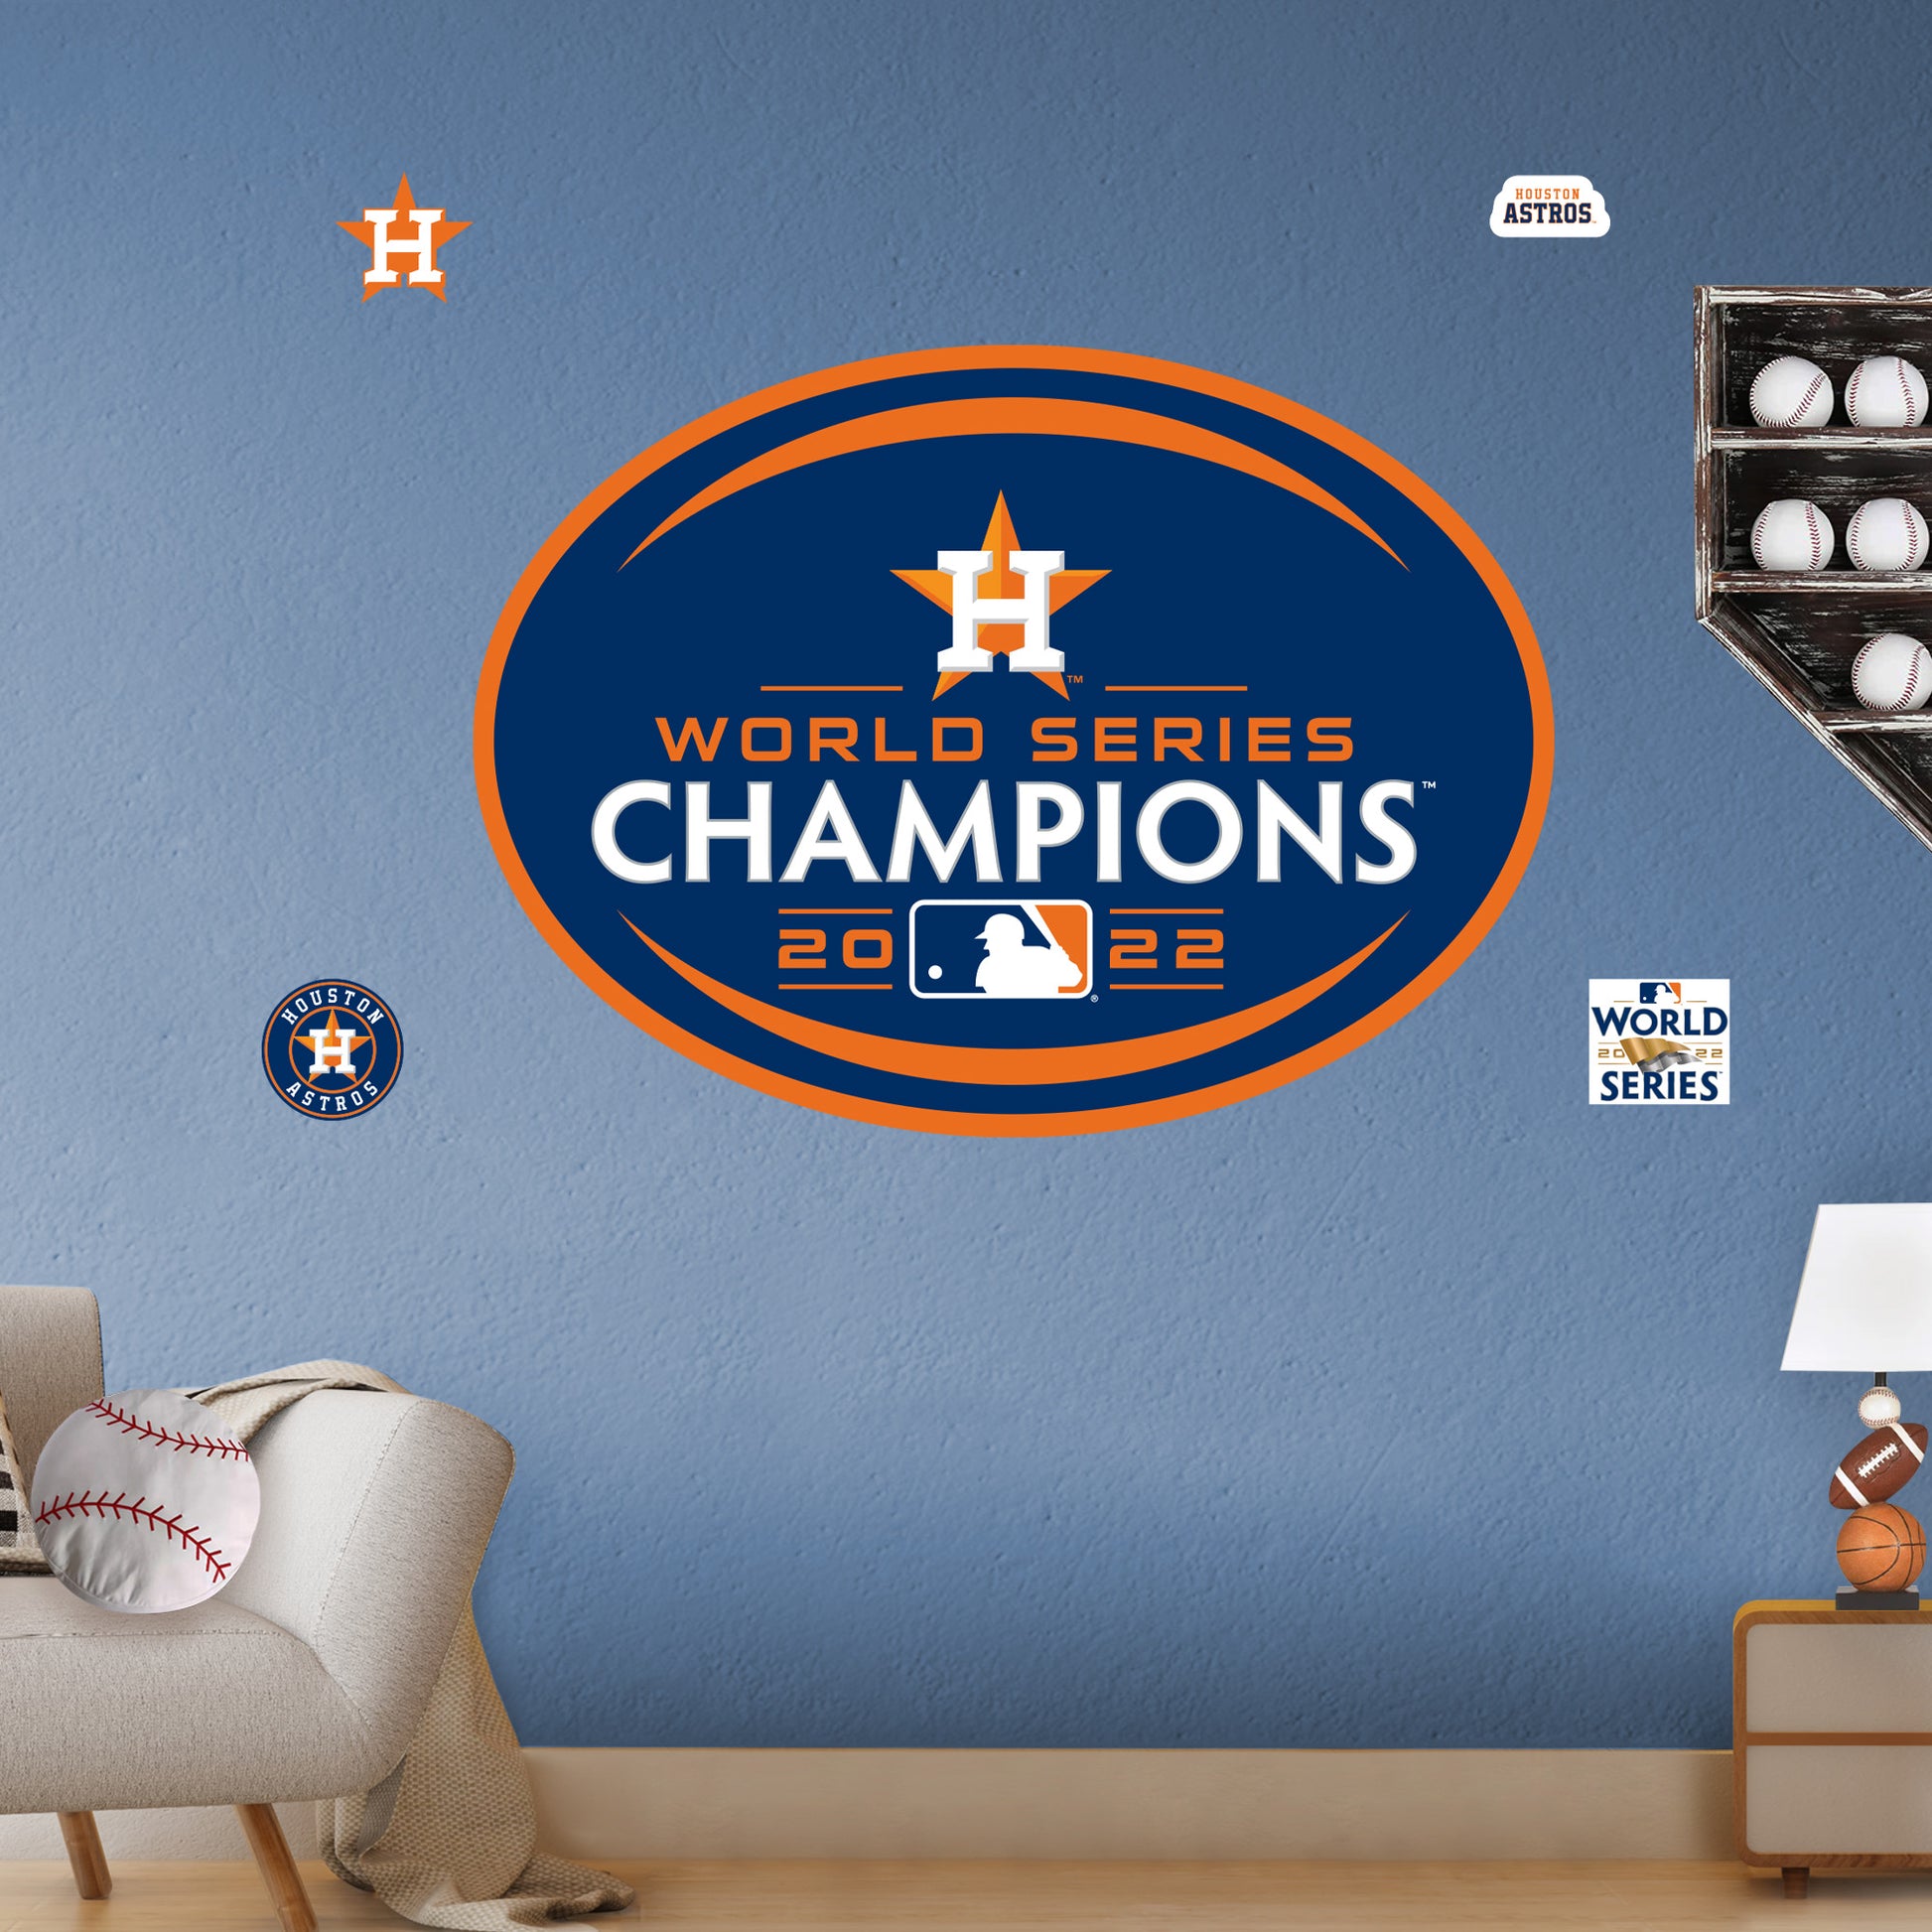 Jose Altuve for Houston Astros: Batting - MLB Removable Wall Decal Large